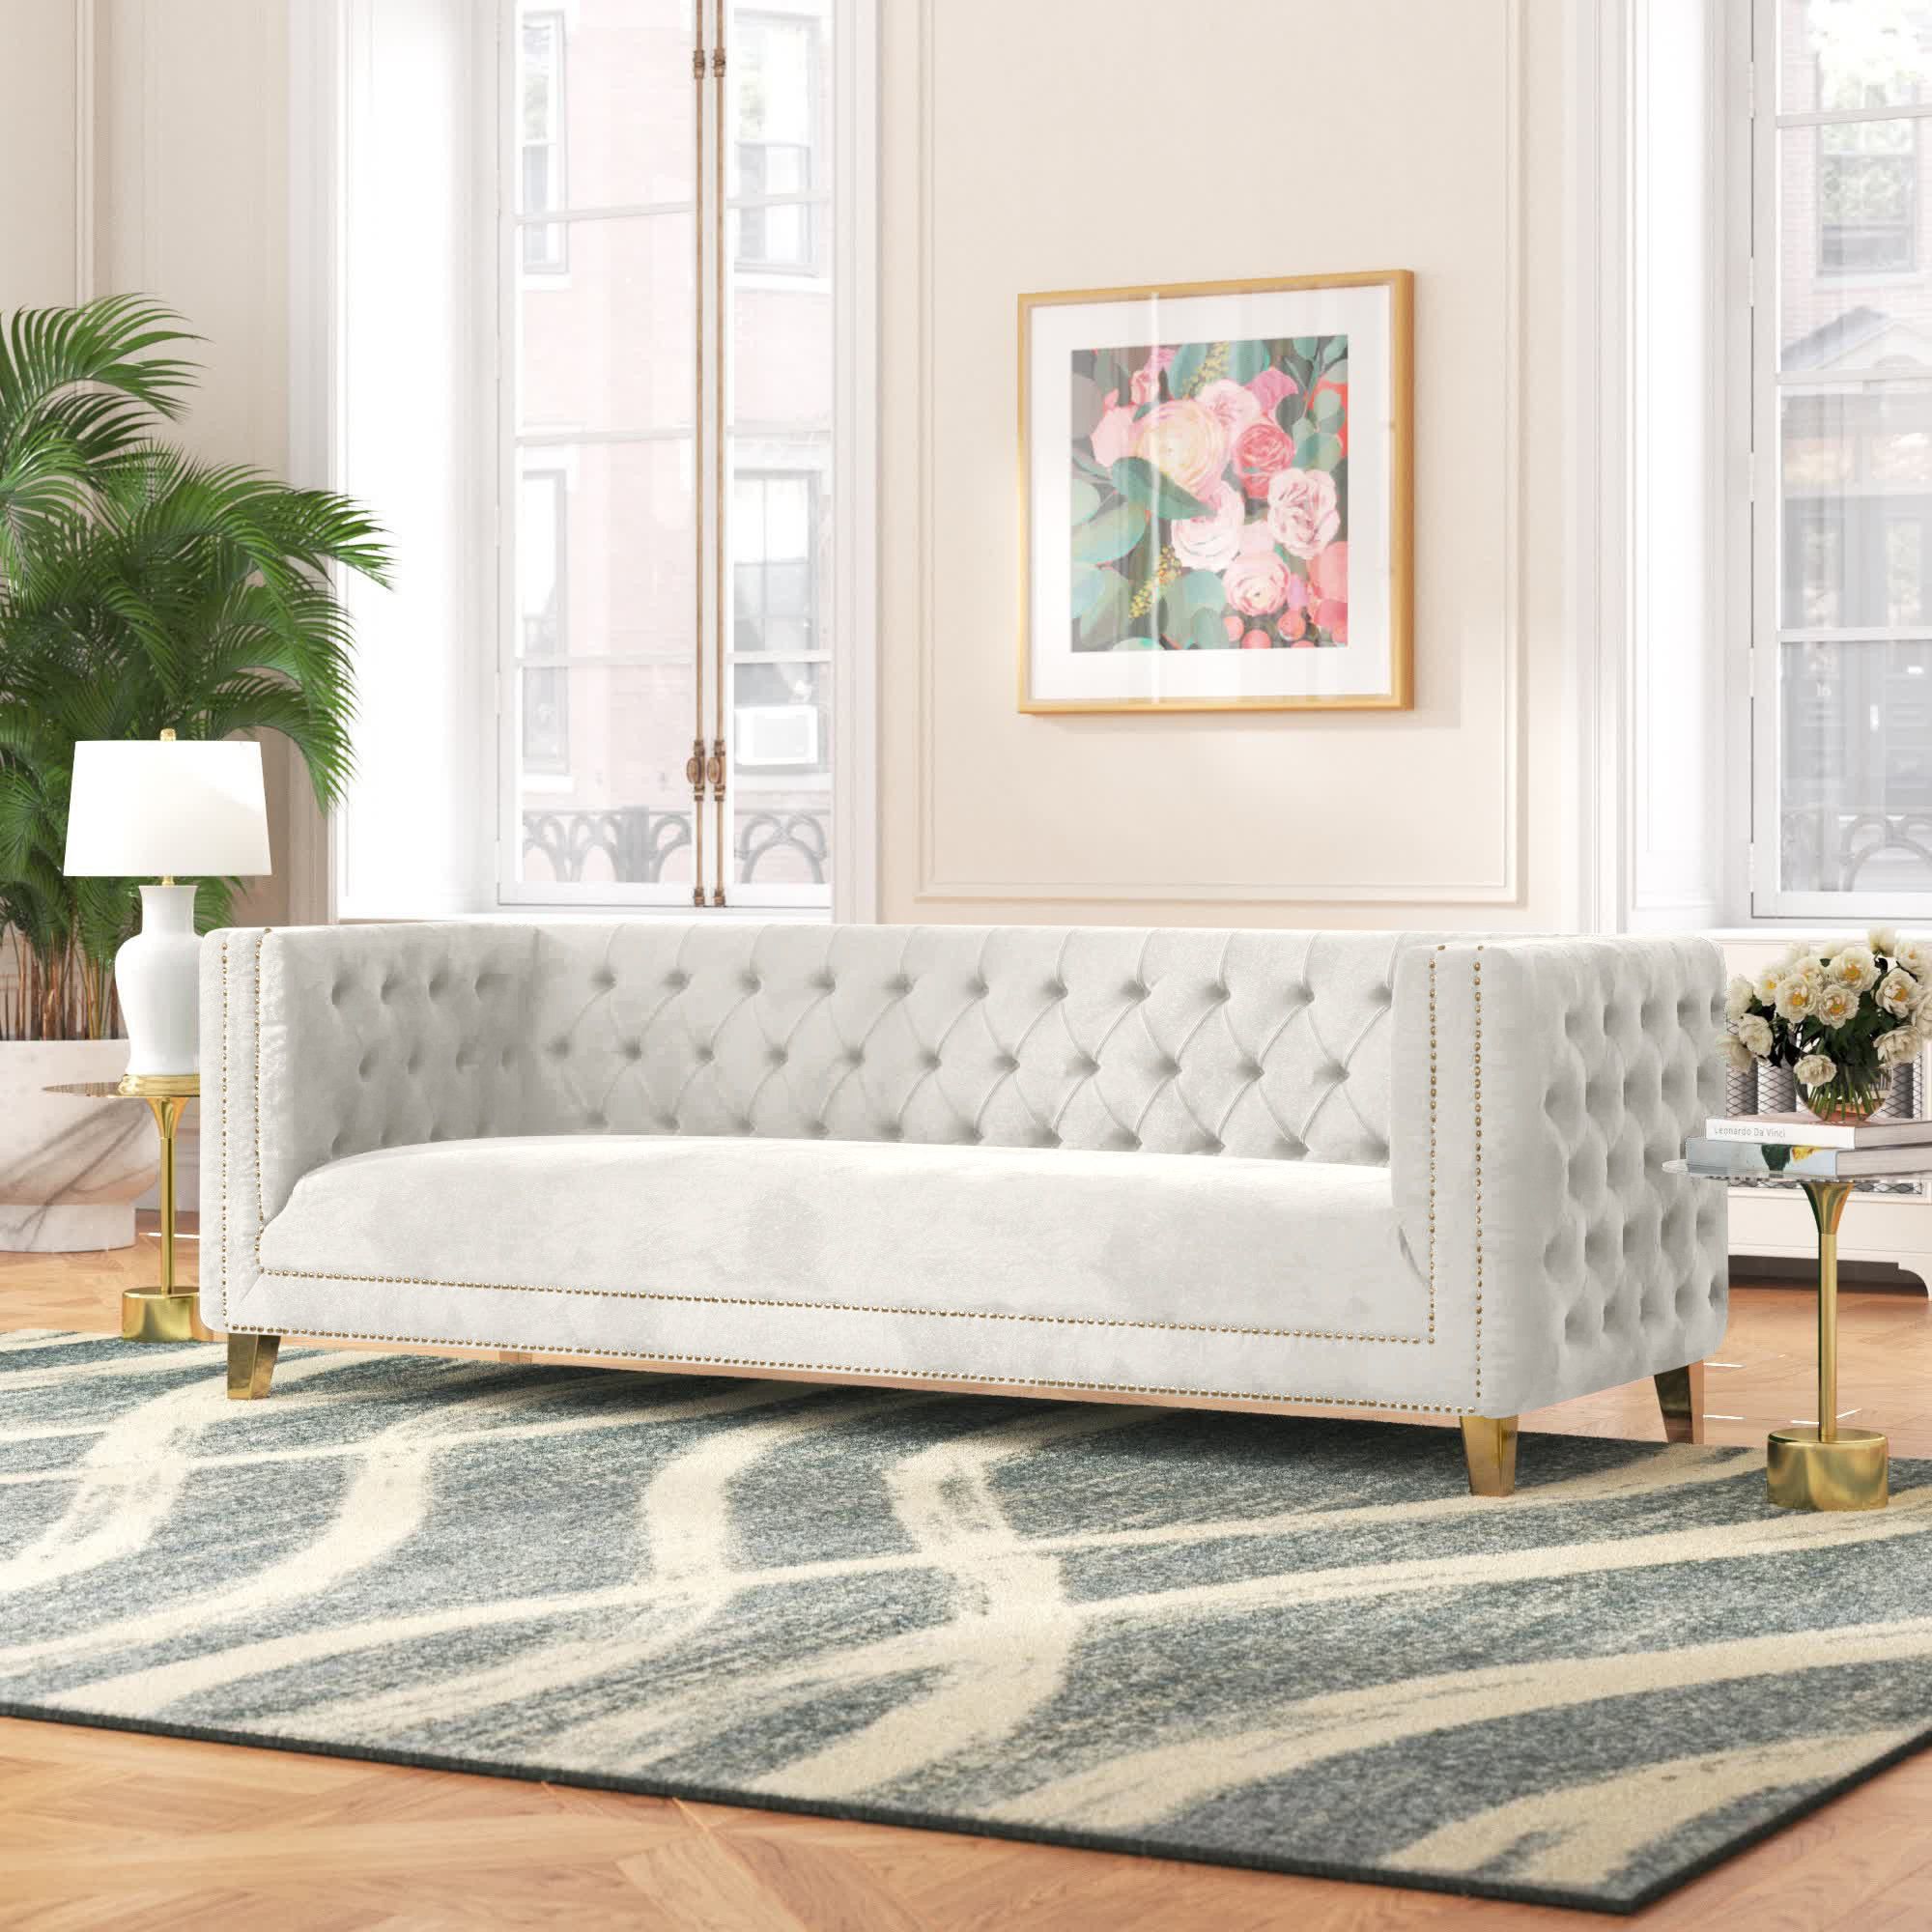 Willa Arlo Interiors Sickels 90'' Upholstered Sofa & Reviews | Wayfair Within Tufted Upholstered Sofas (View 3 of 15)